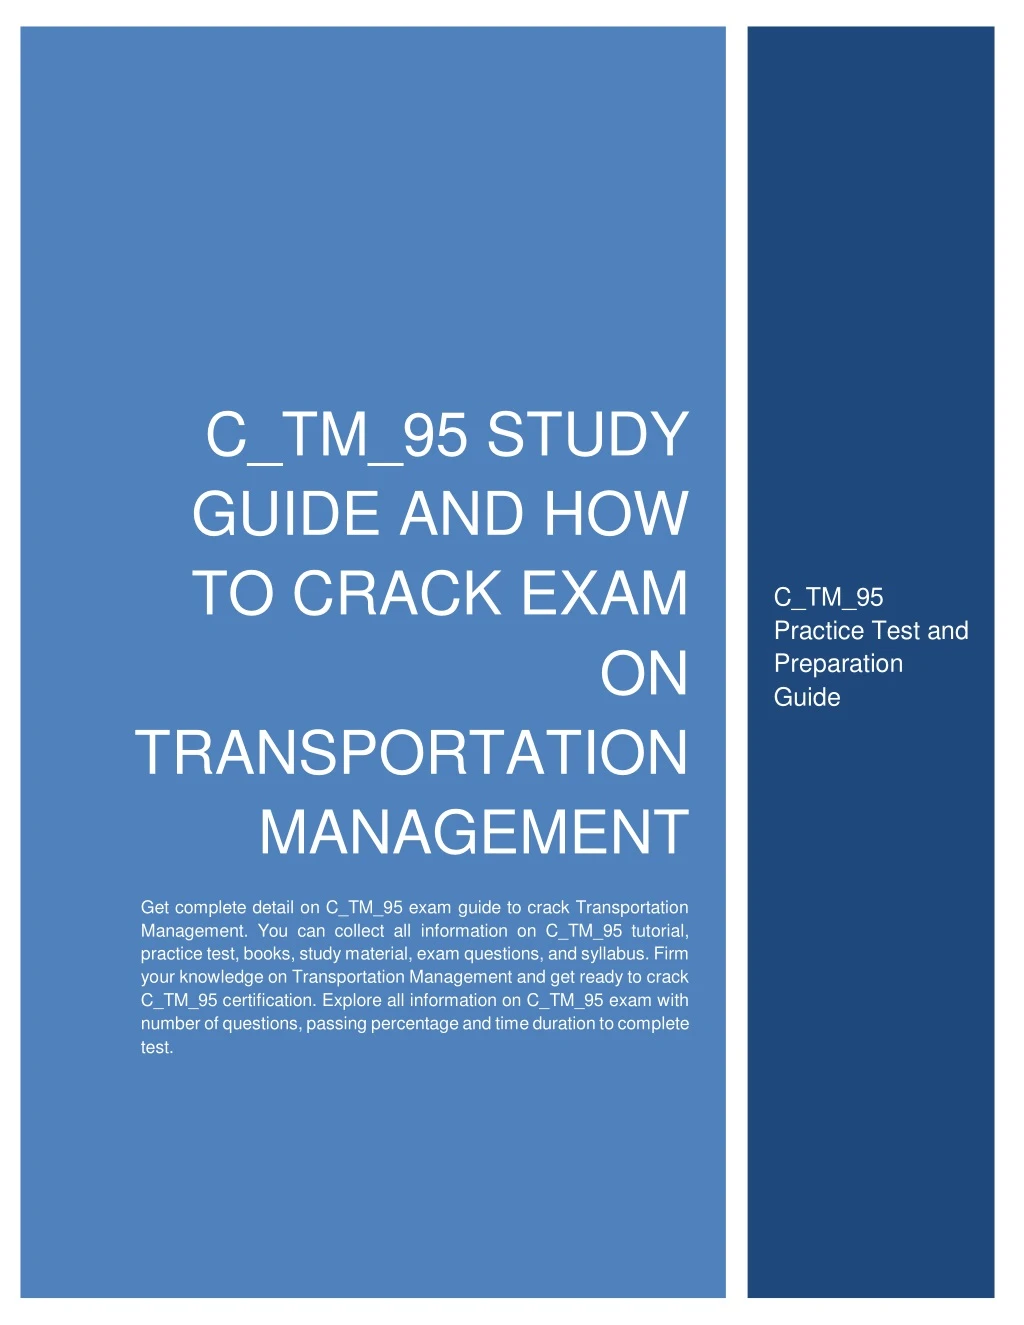 c tm 95 study guide and how to crack exam